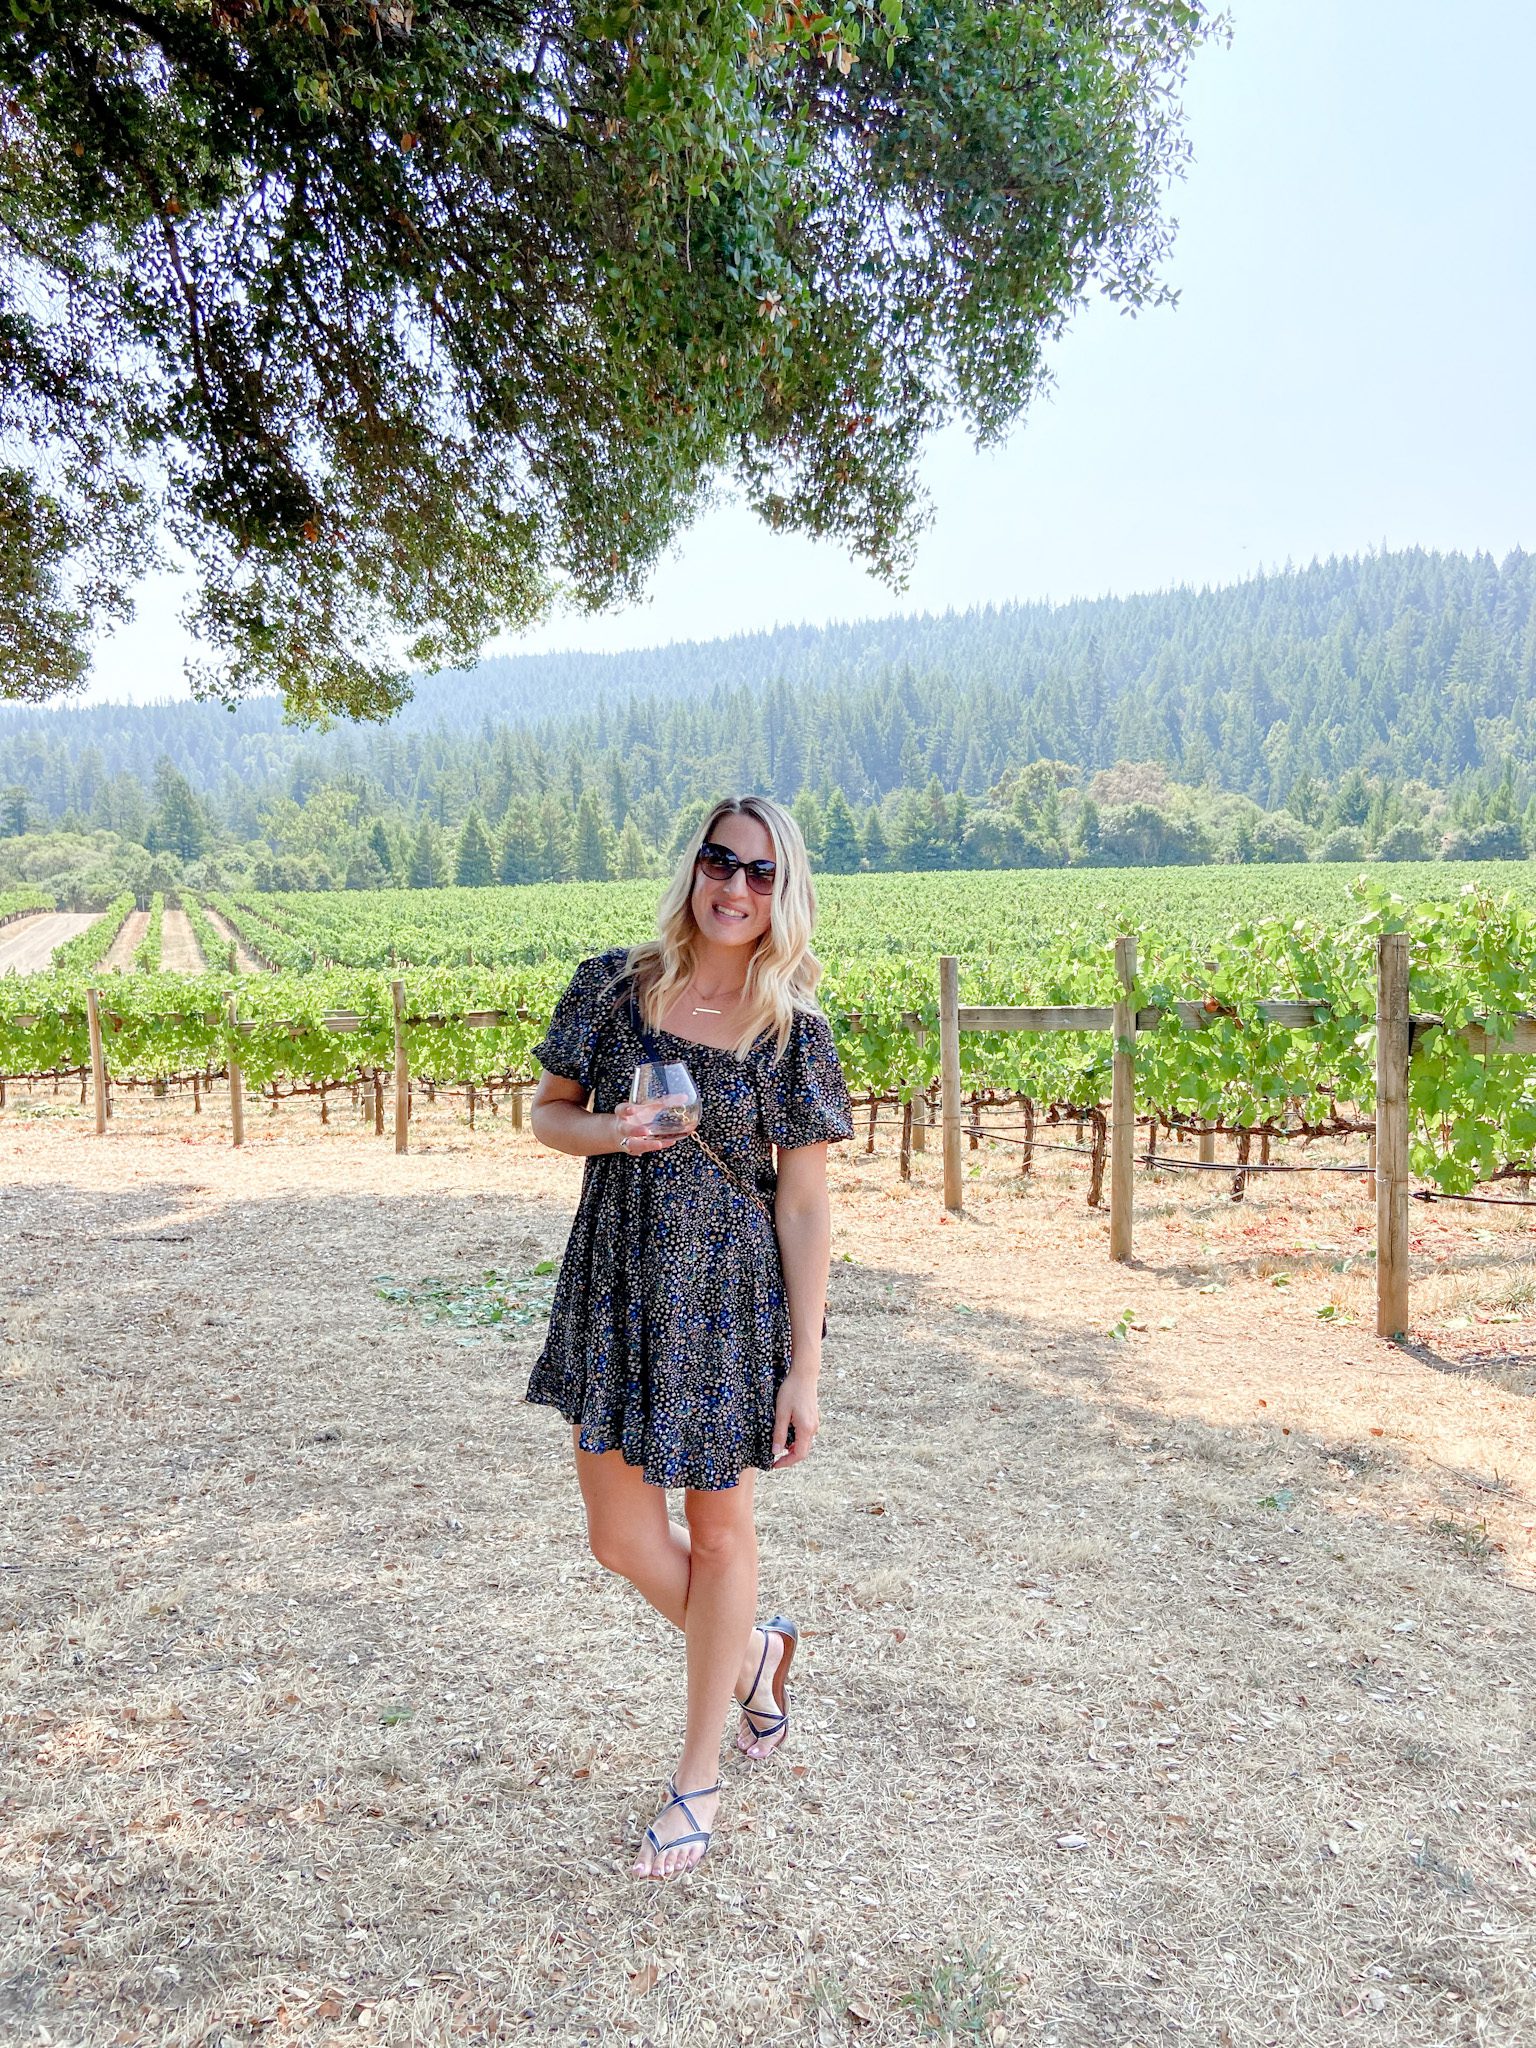 Visit Anderson Valley Wine Country